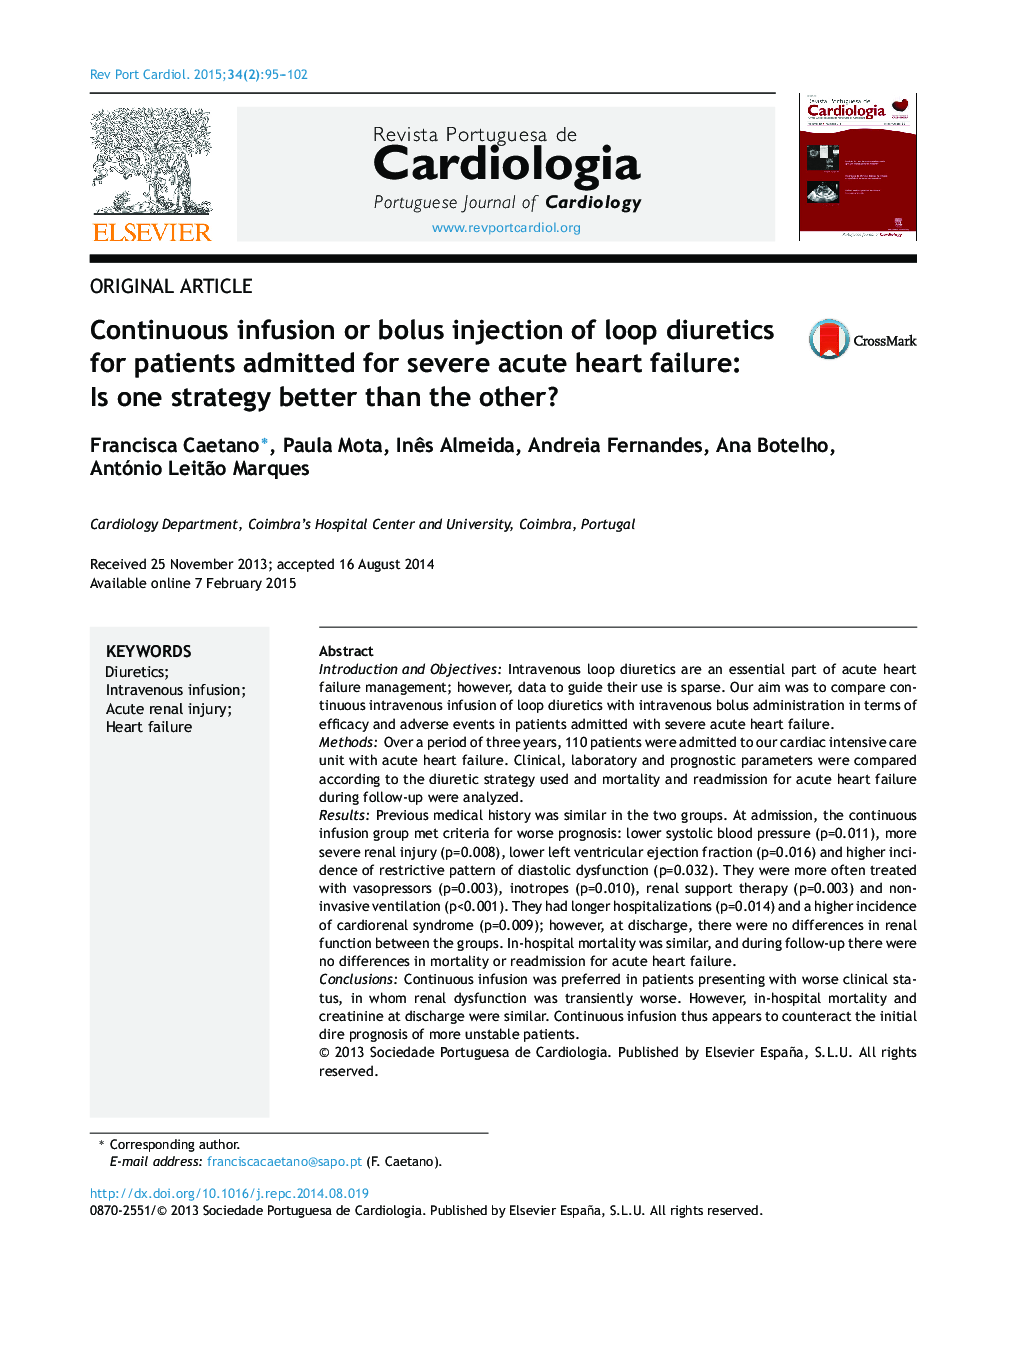 Continuous infusion or bolus injection of loop diuretics for patients admitted for severe acute heart failure: Is one strategy better than the other?